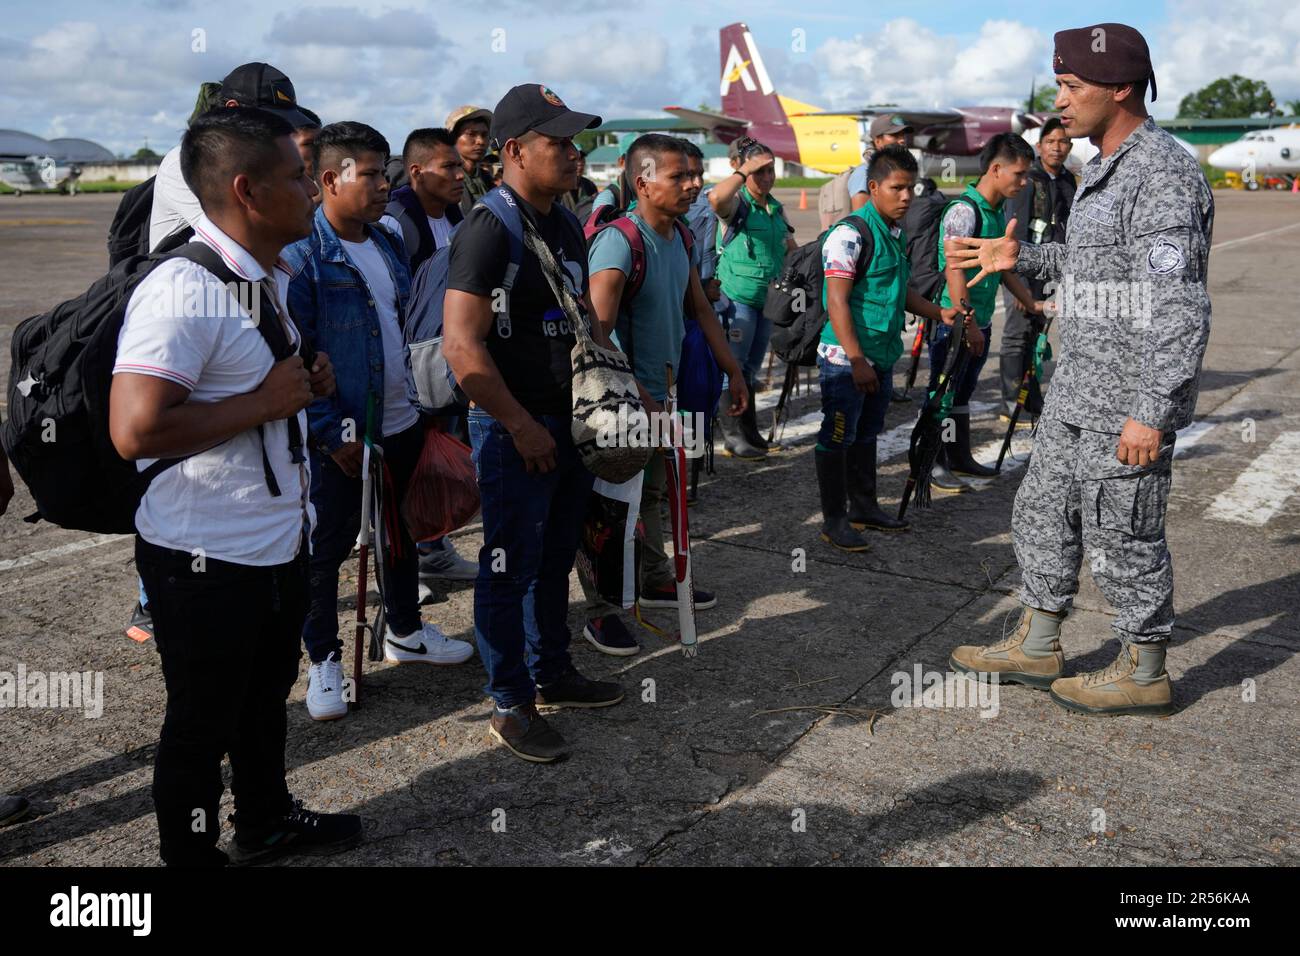 General Pedro Sanchez, the commander of the joint command of special operations of the military forces, welcomes Indigenous people the airport in San Jose del Guaviare, Colombia, Sunday, May 21, 2023, after they arrived to help in the search of four Indigenous children who are missing after a deadly plane crash. The May 30 discovery of footprints of a small foot rekindled the hope of finding the children alive after their plane crashed on May 1. Soldiers found the wreckage and the bodies of three adults, including the pilot and the children's mother. (AP Photo/Fernando Vergara) Stock Photo